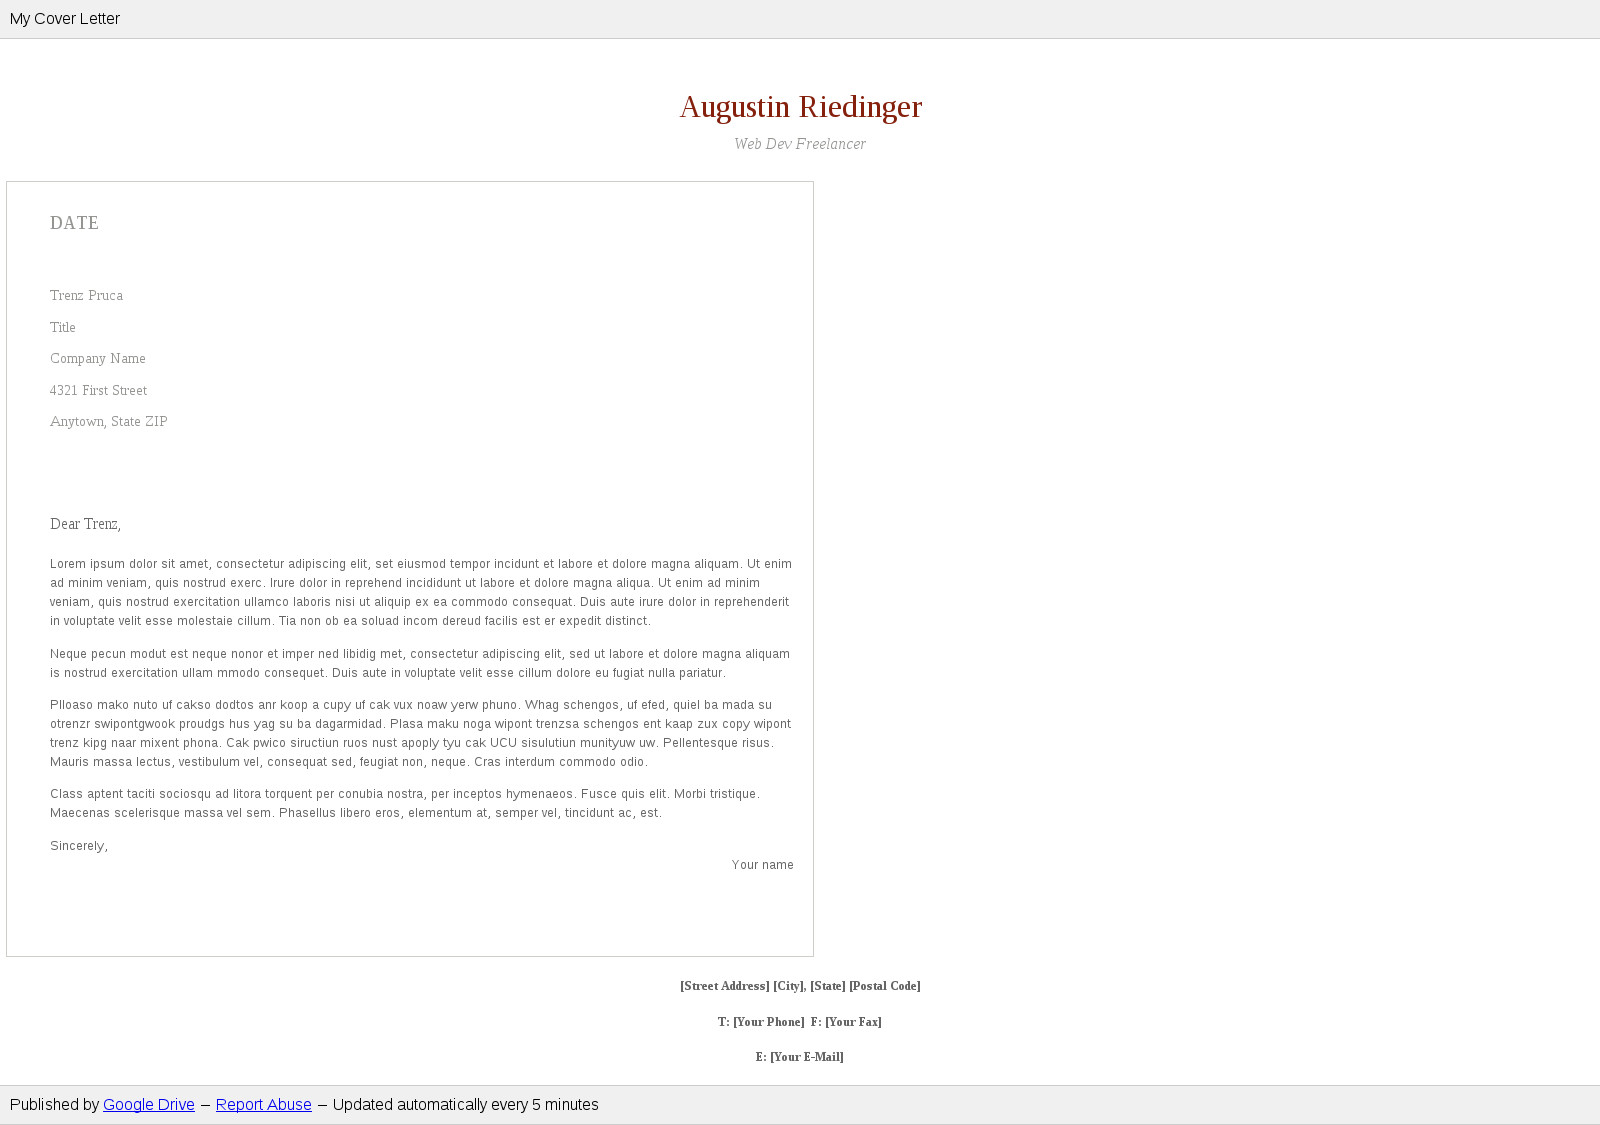 Cover letter published by google